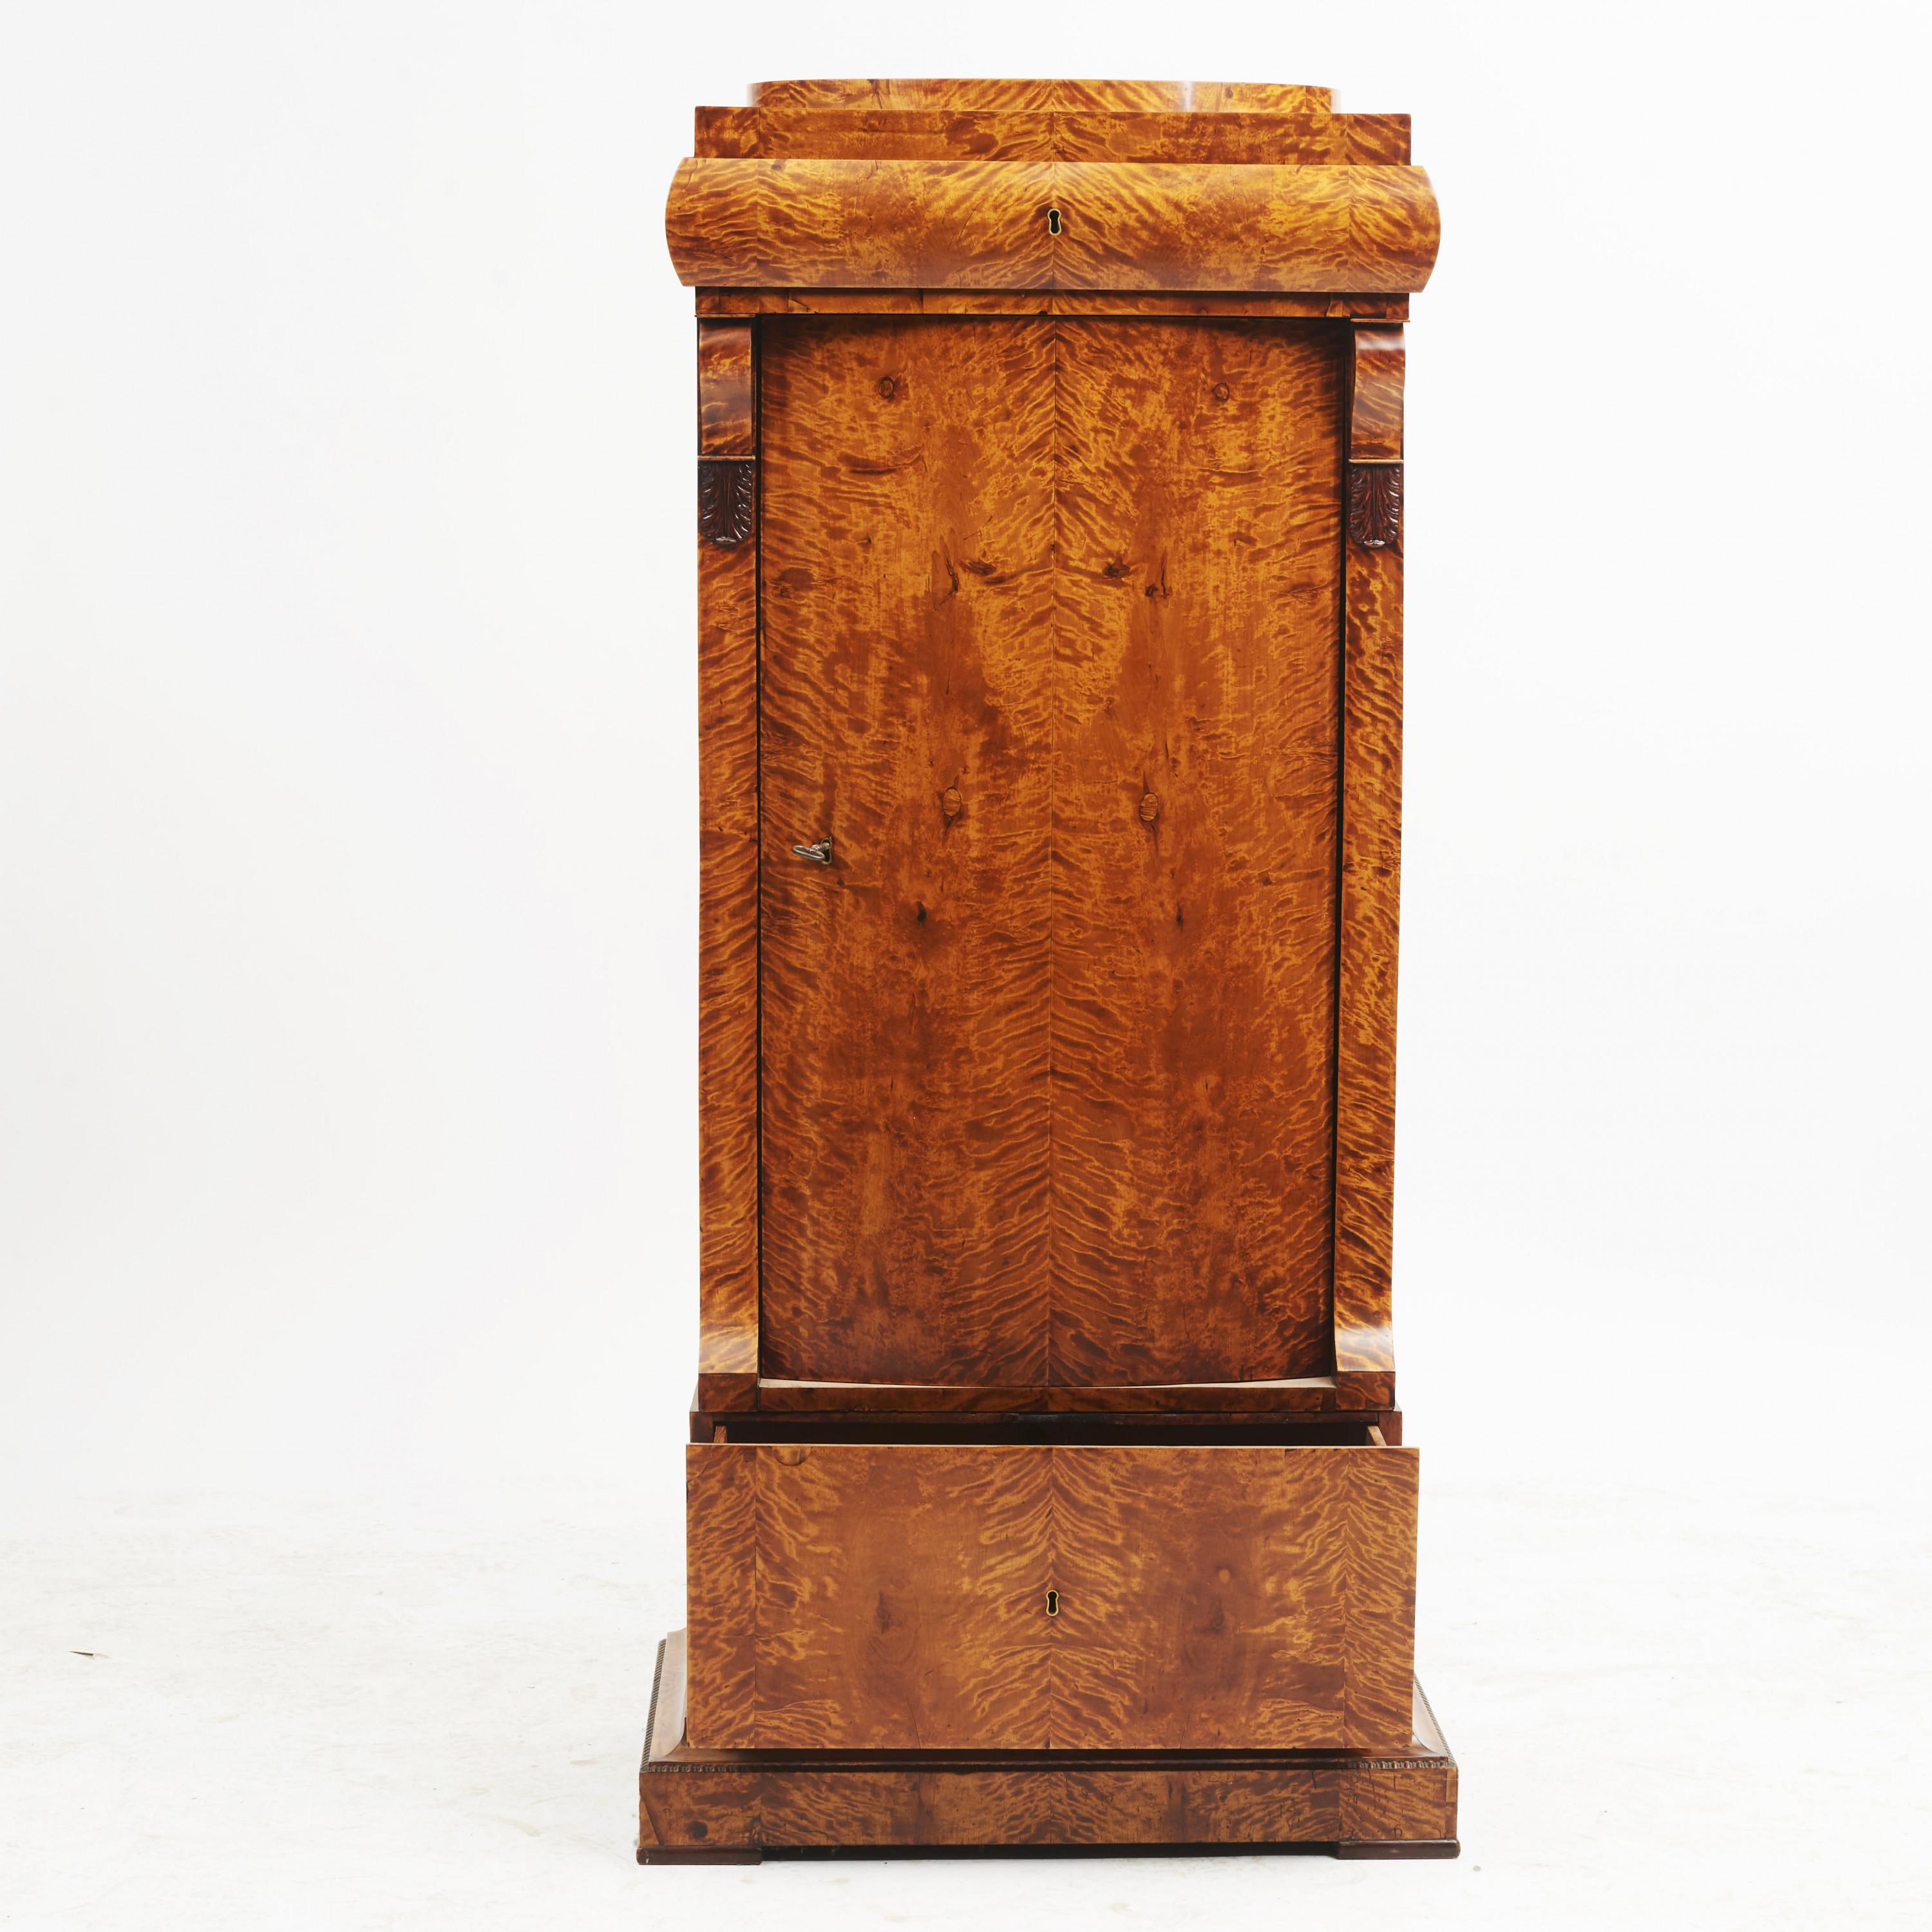 19th century Danish late Empire (Biedermeier) pedestal cabinet. Veneered with flamed birch.
Curved door. Oval top with a drawer underneath. One-drawer at the bottom.
Denmark, circa 1820-1830.

Measurement (cm): H 143, W 63, D 40.5.